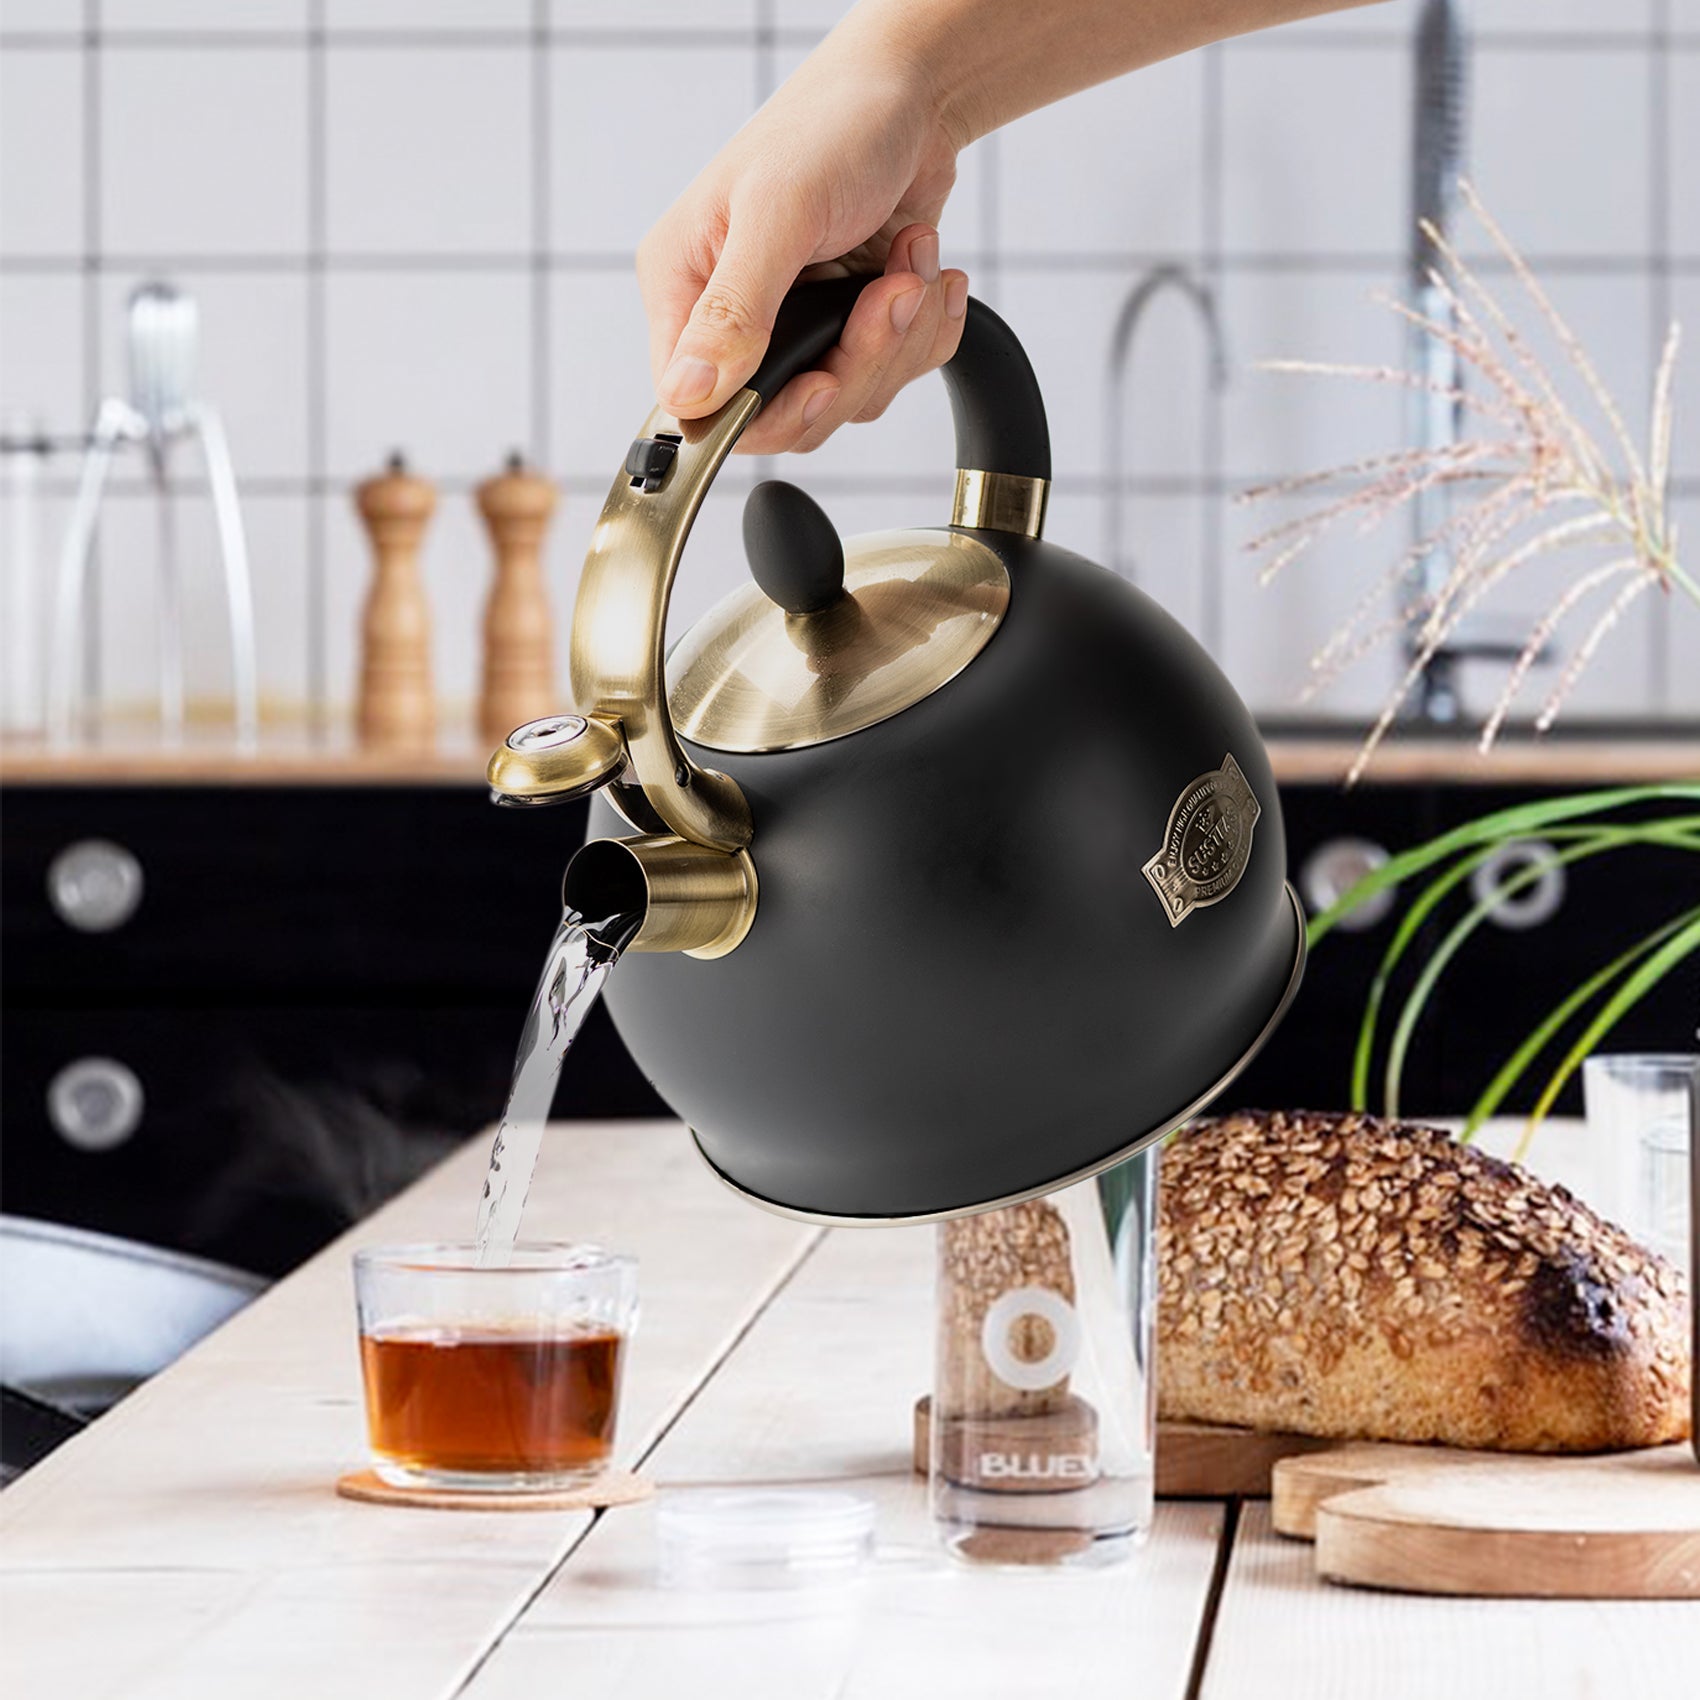 S-P Whistling Tea Kettle Stainless Steel Teapot Teakettle for Stovetop Induction Stove Top Fast Boiling Heat Water Tea Pot 22 Quart(gray)